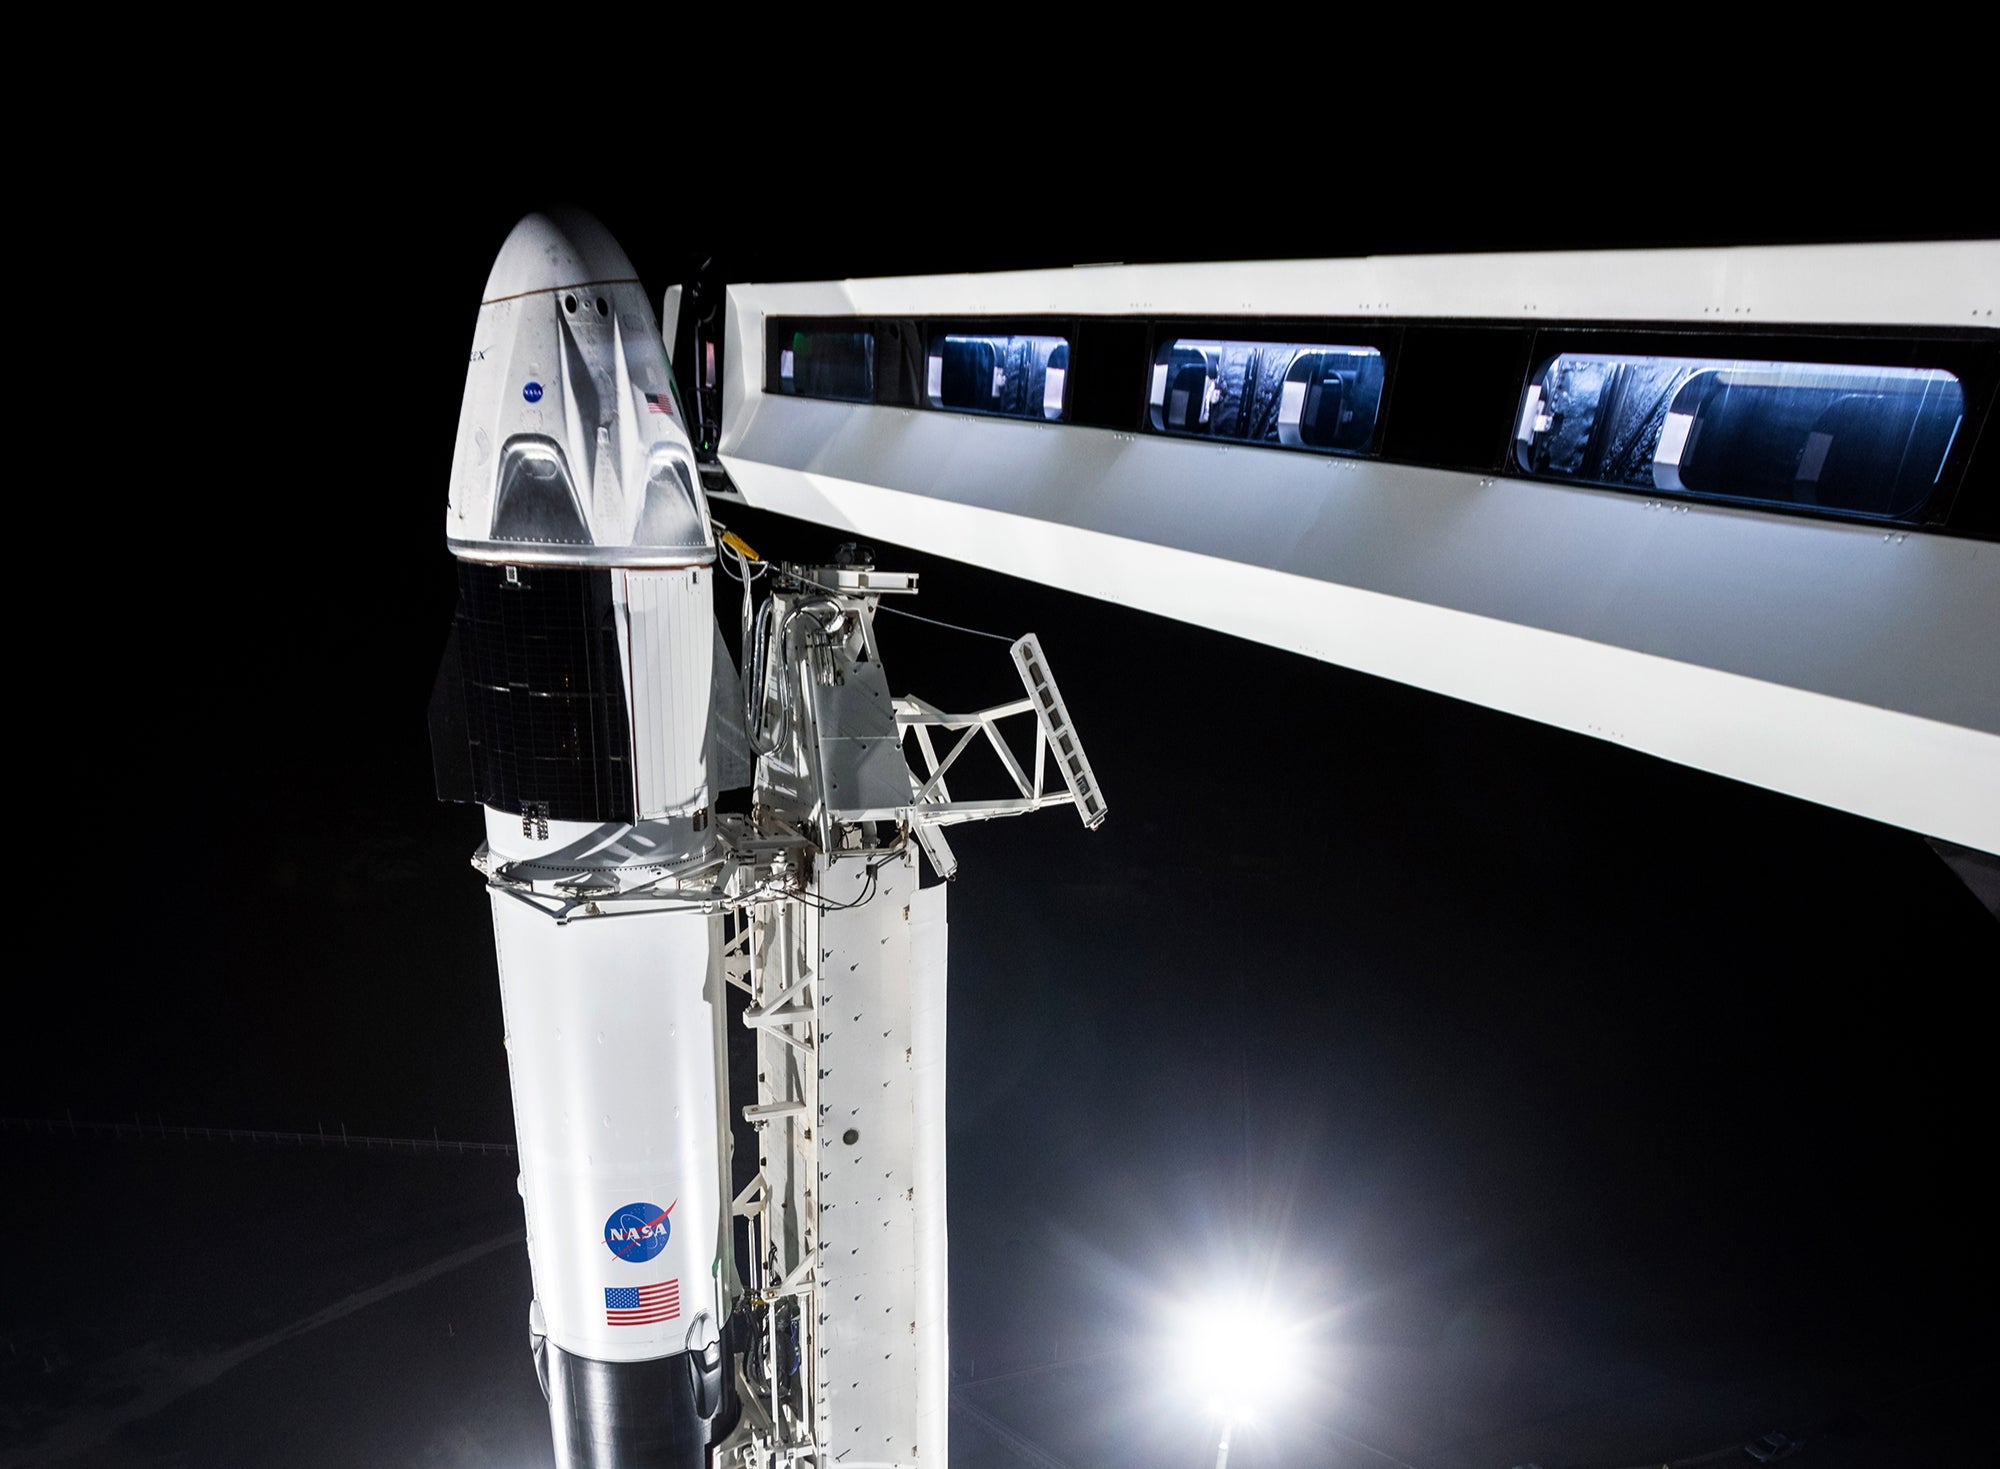 NASA Administrator is 'fairly confident' SpaceX's Crew Dragon will launch astronauts next month